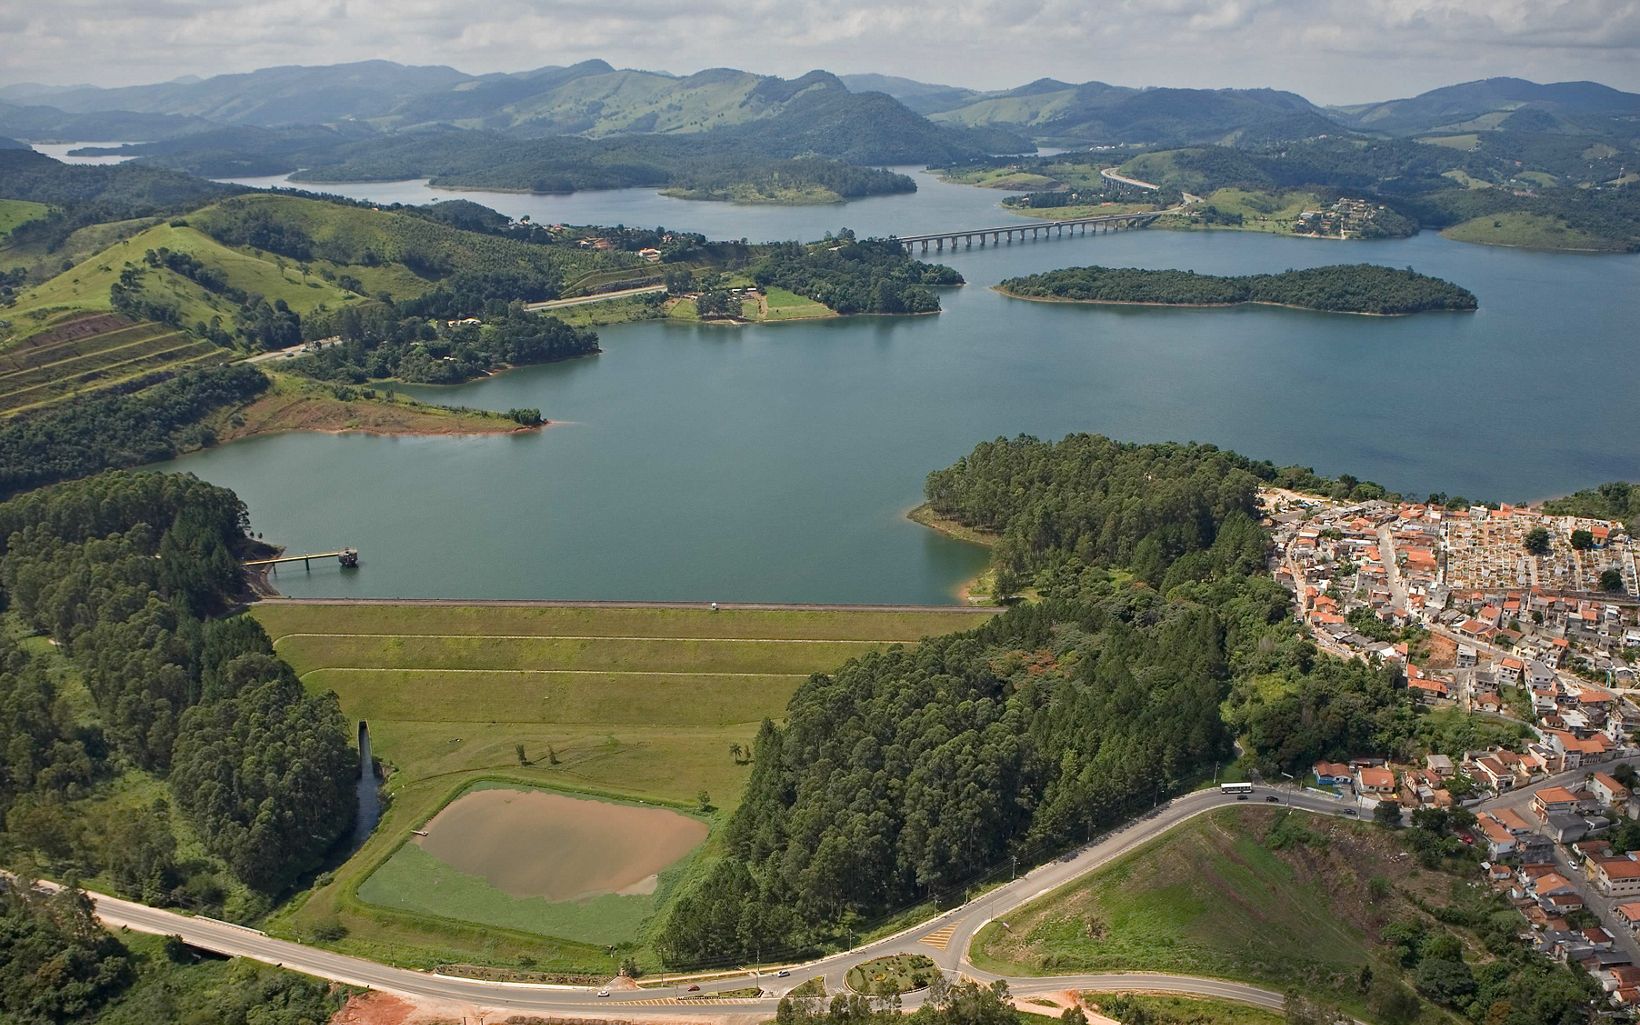 Aerial view of the Atibaina Reservoir near the town of Nazare Paulista, Brazil.